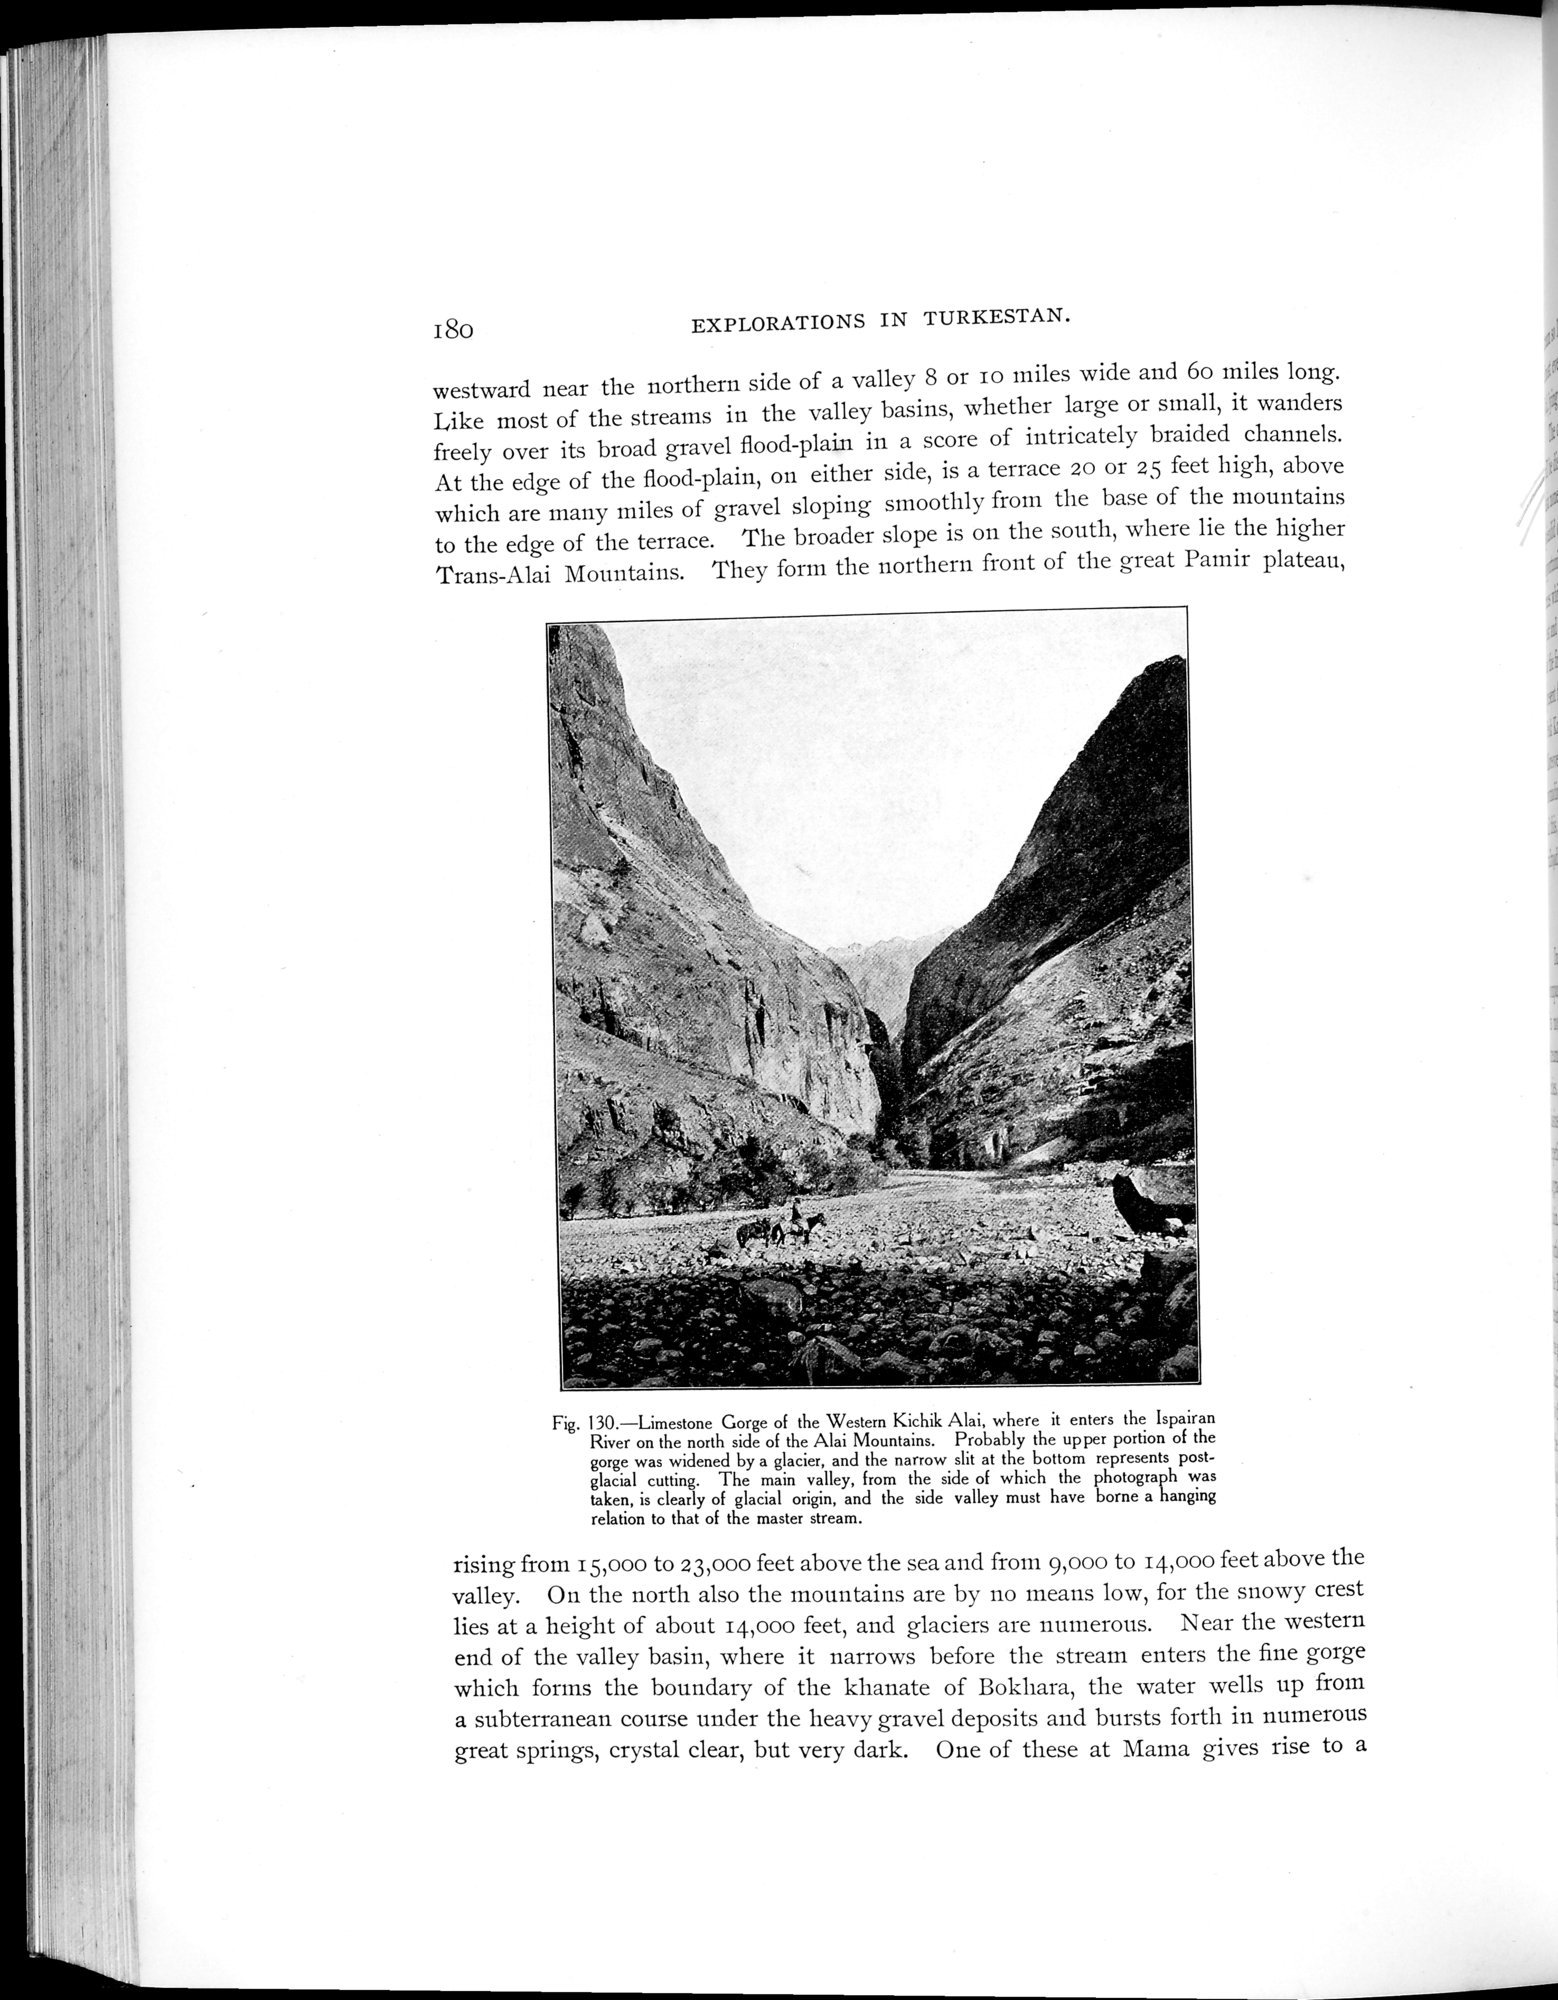 Explorations in Turkestan 1903 : vol.1 / Page 210 (Grayscale High Resolution Image)